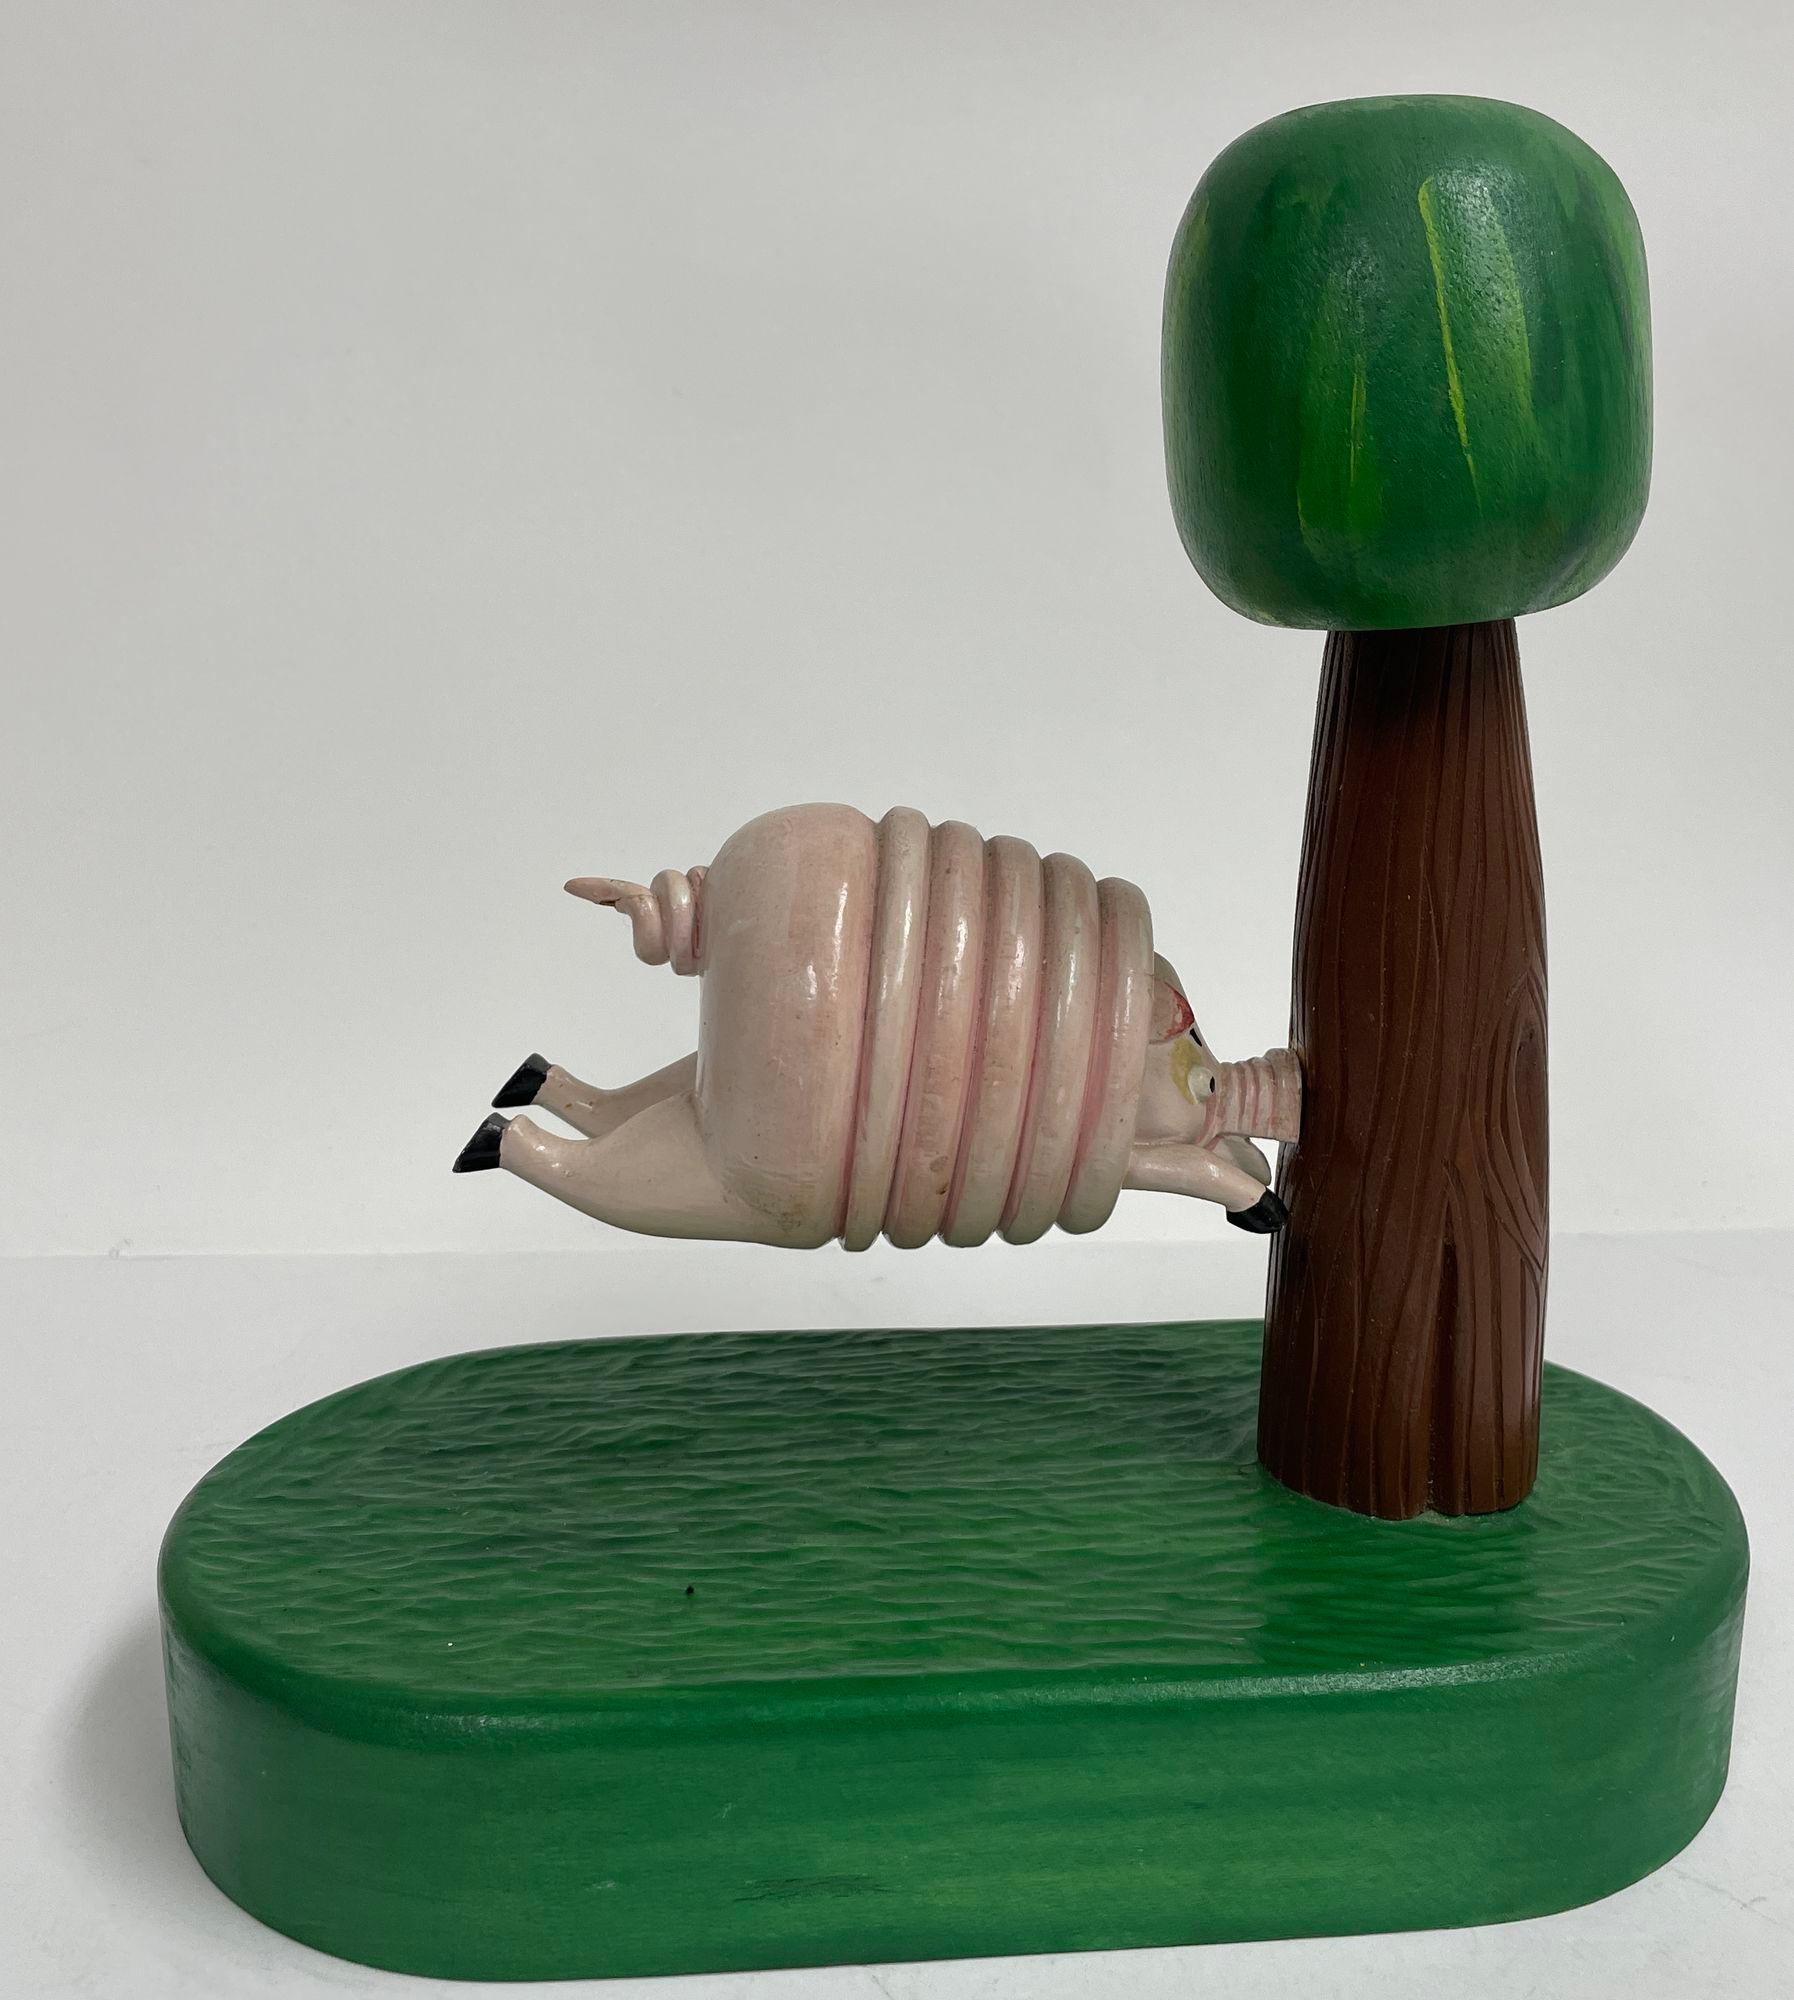 20th Century Vintage Folk Art Wood Sculpture of a Pig Running into a Tree by R. Harper 1991 For Sale